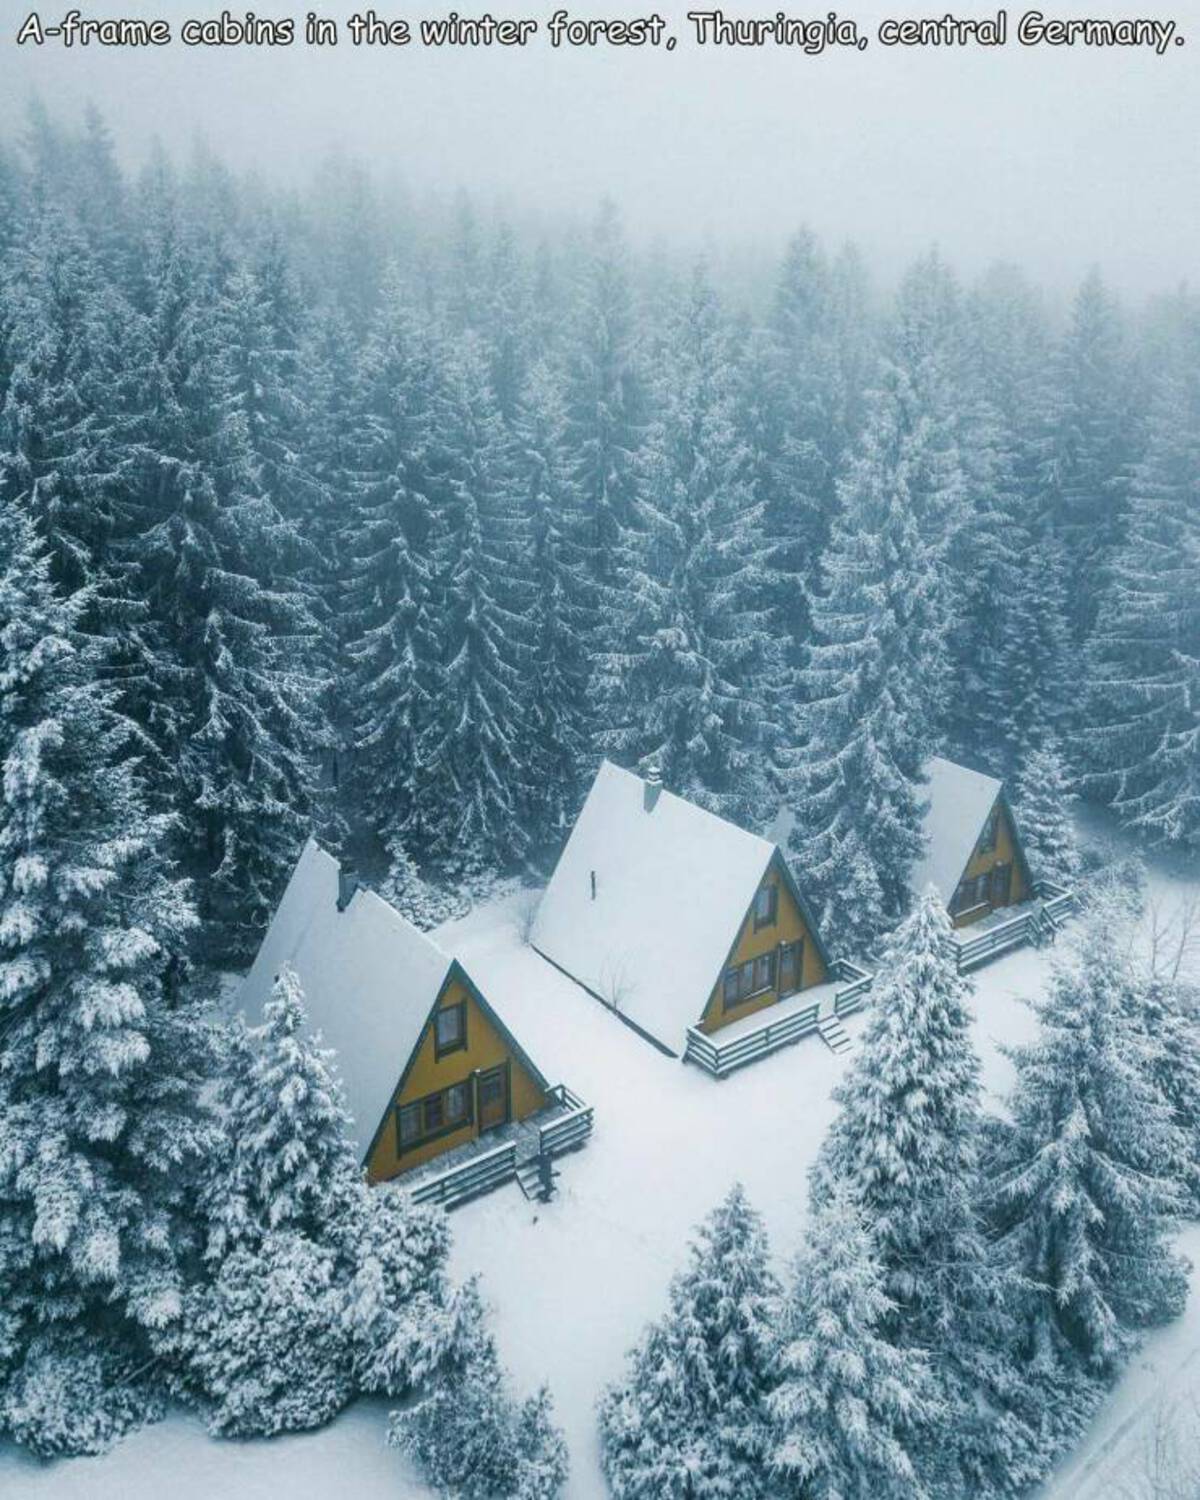 winter - Aframe cabins in the winter forest, Thuringia, central Germany.